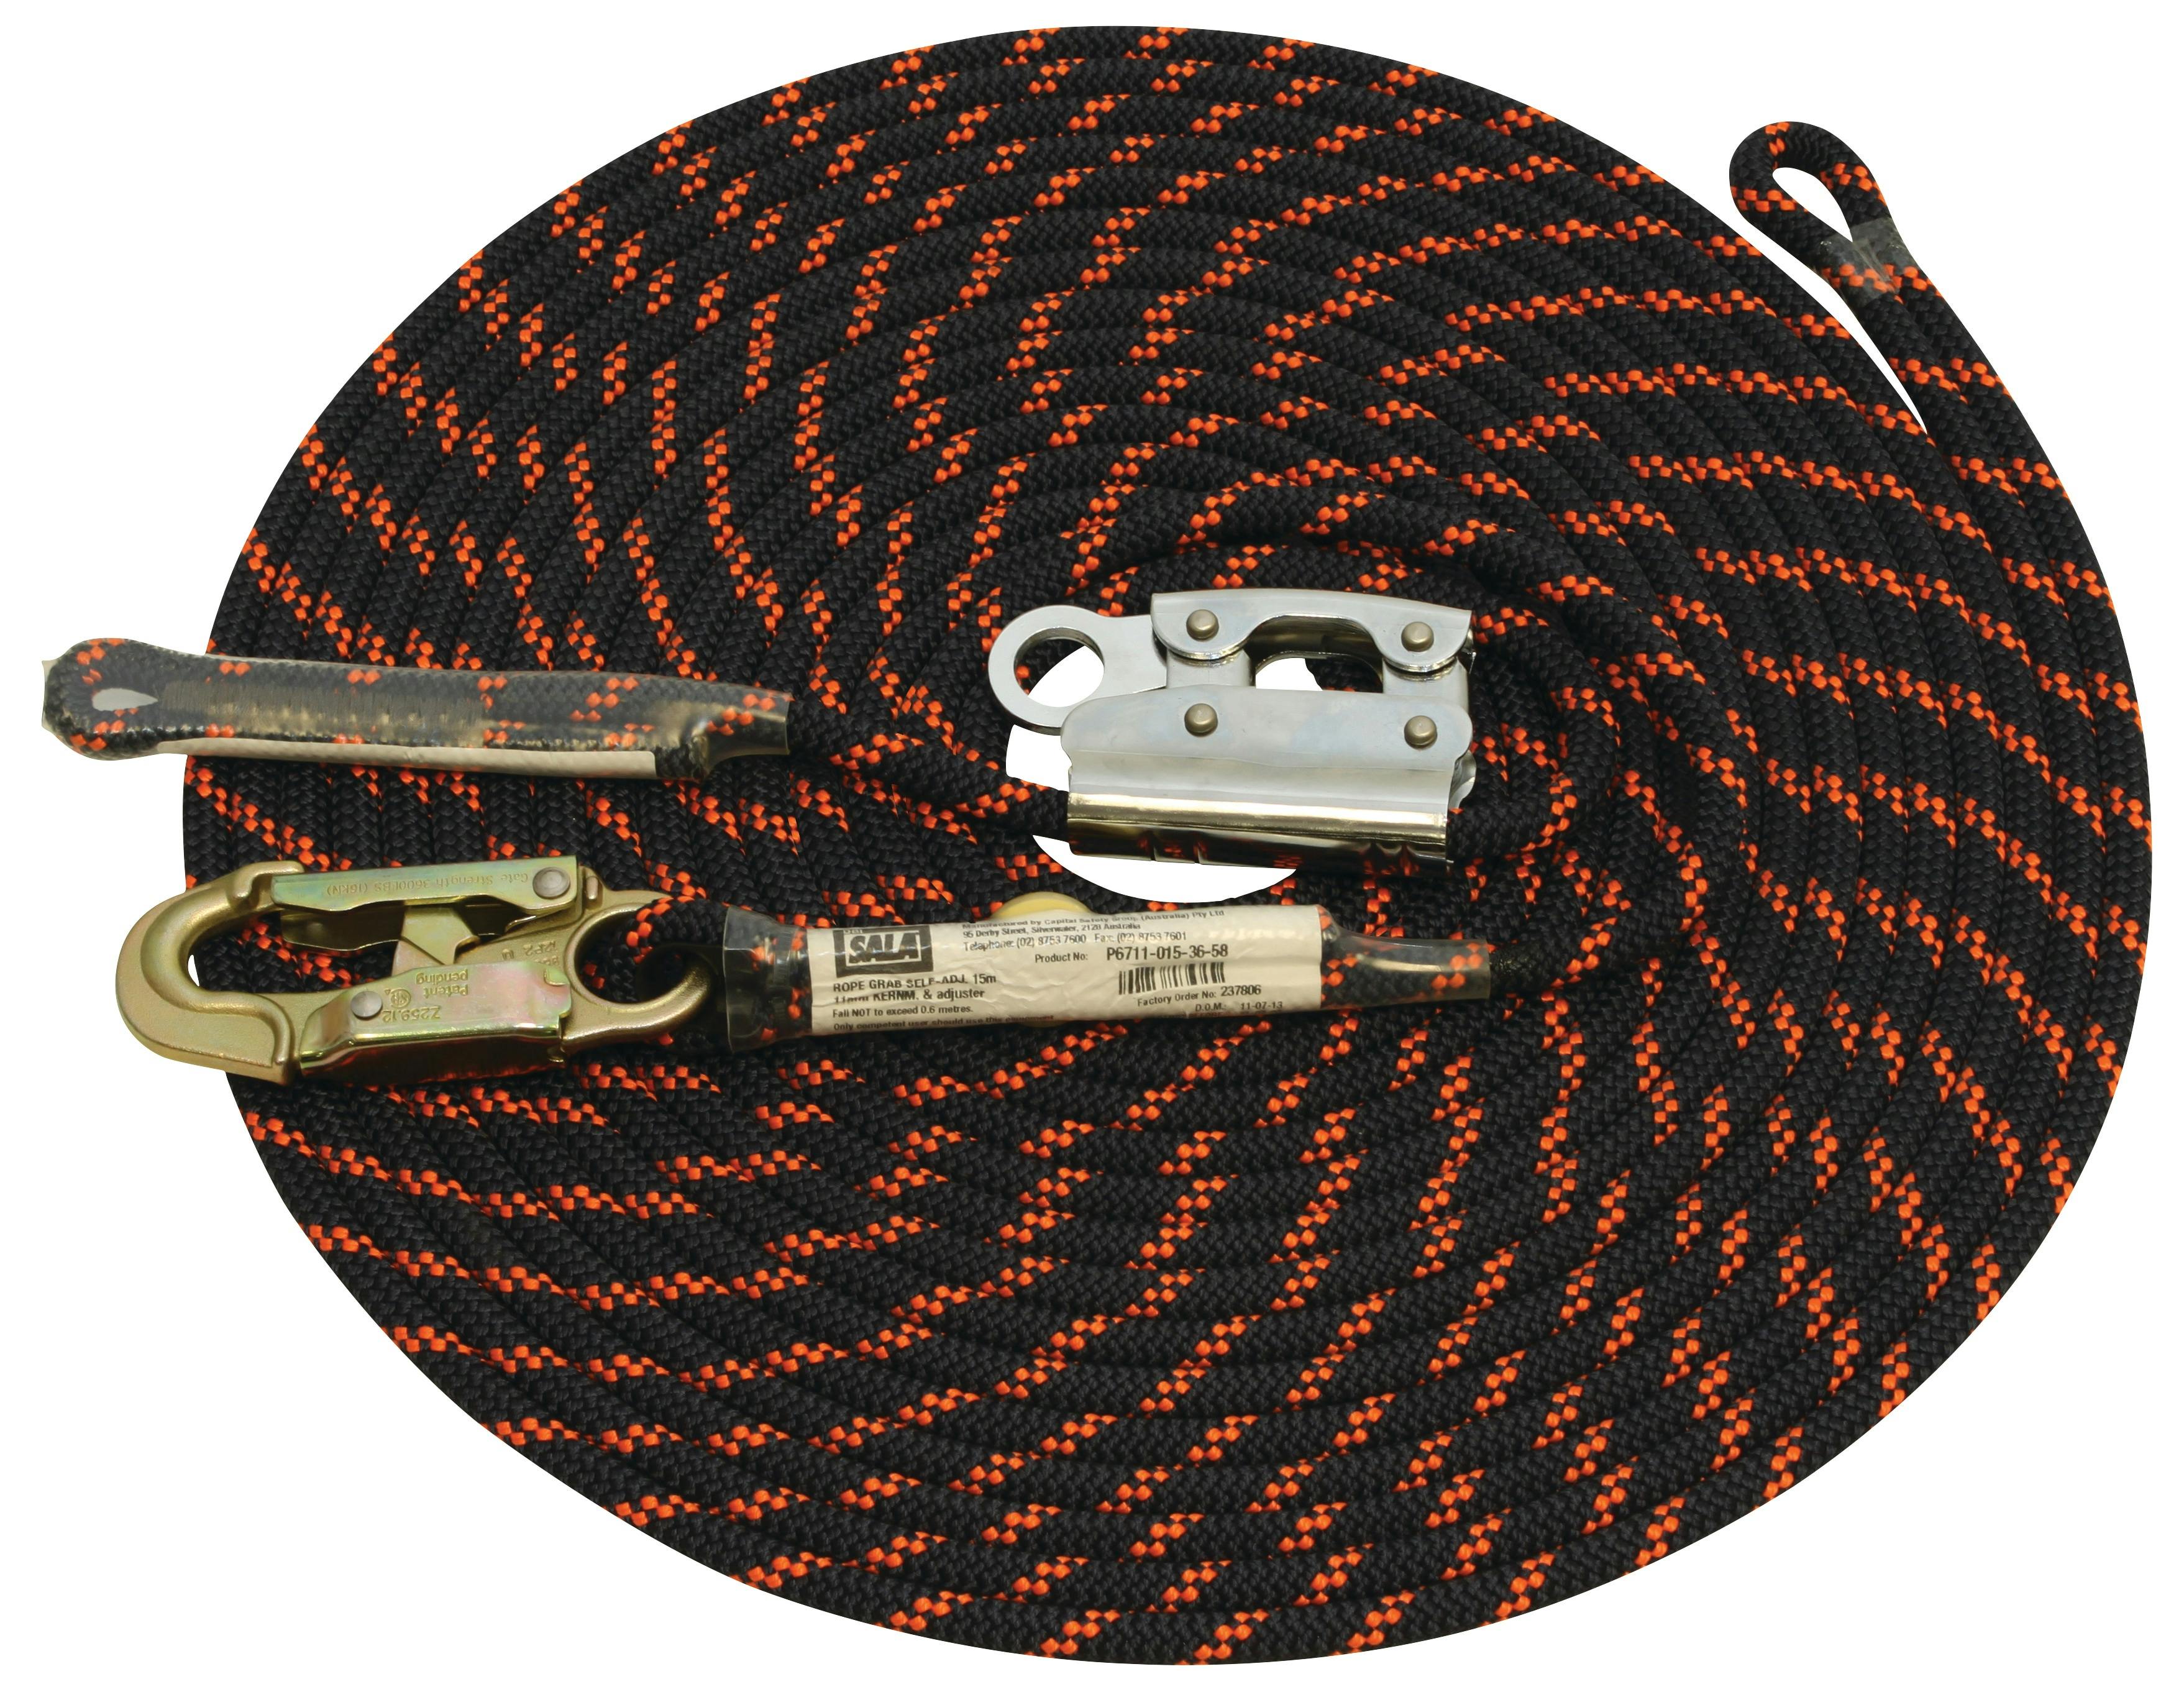 3M™ DBI-SALA® Lifeline Assembly System with integral Rope Grab P6711-030-36-58, 30 m, 1 EA/Case